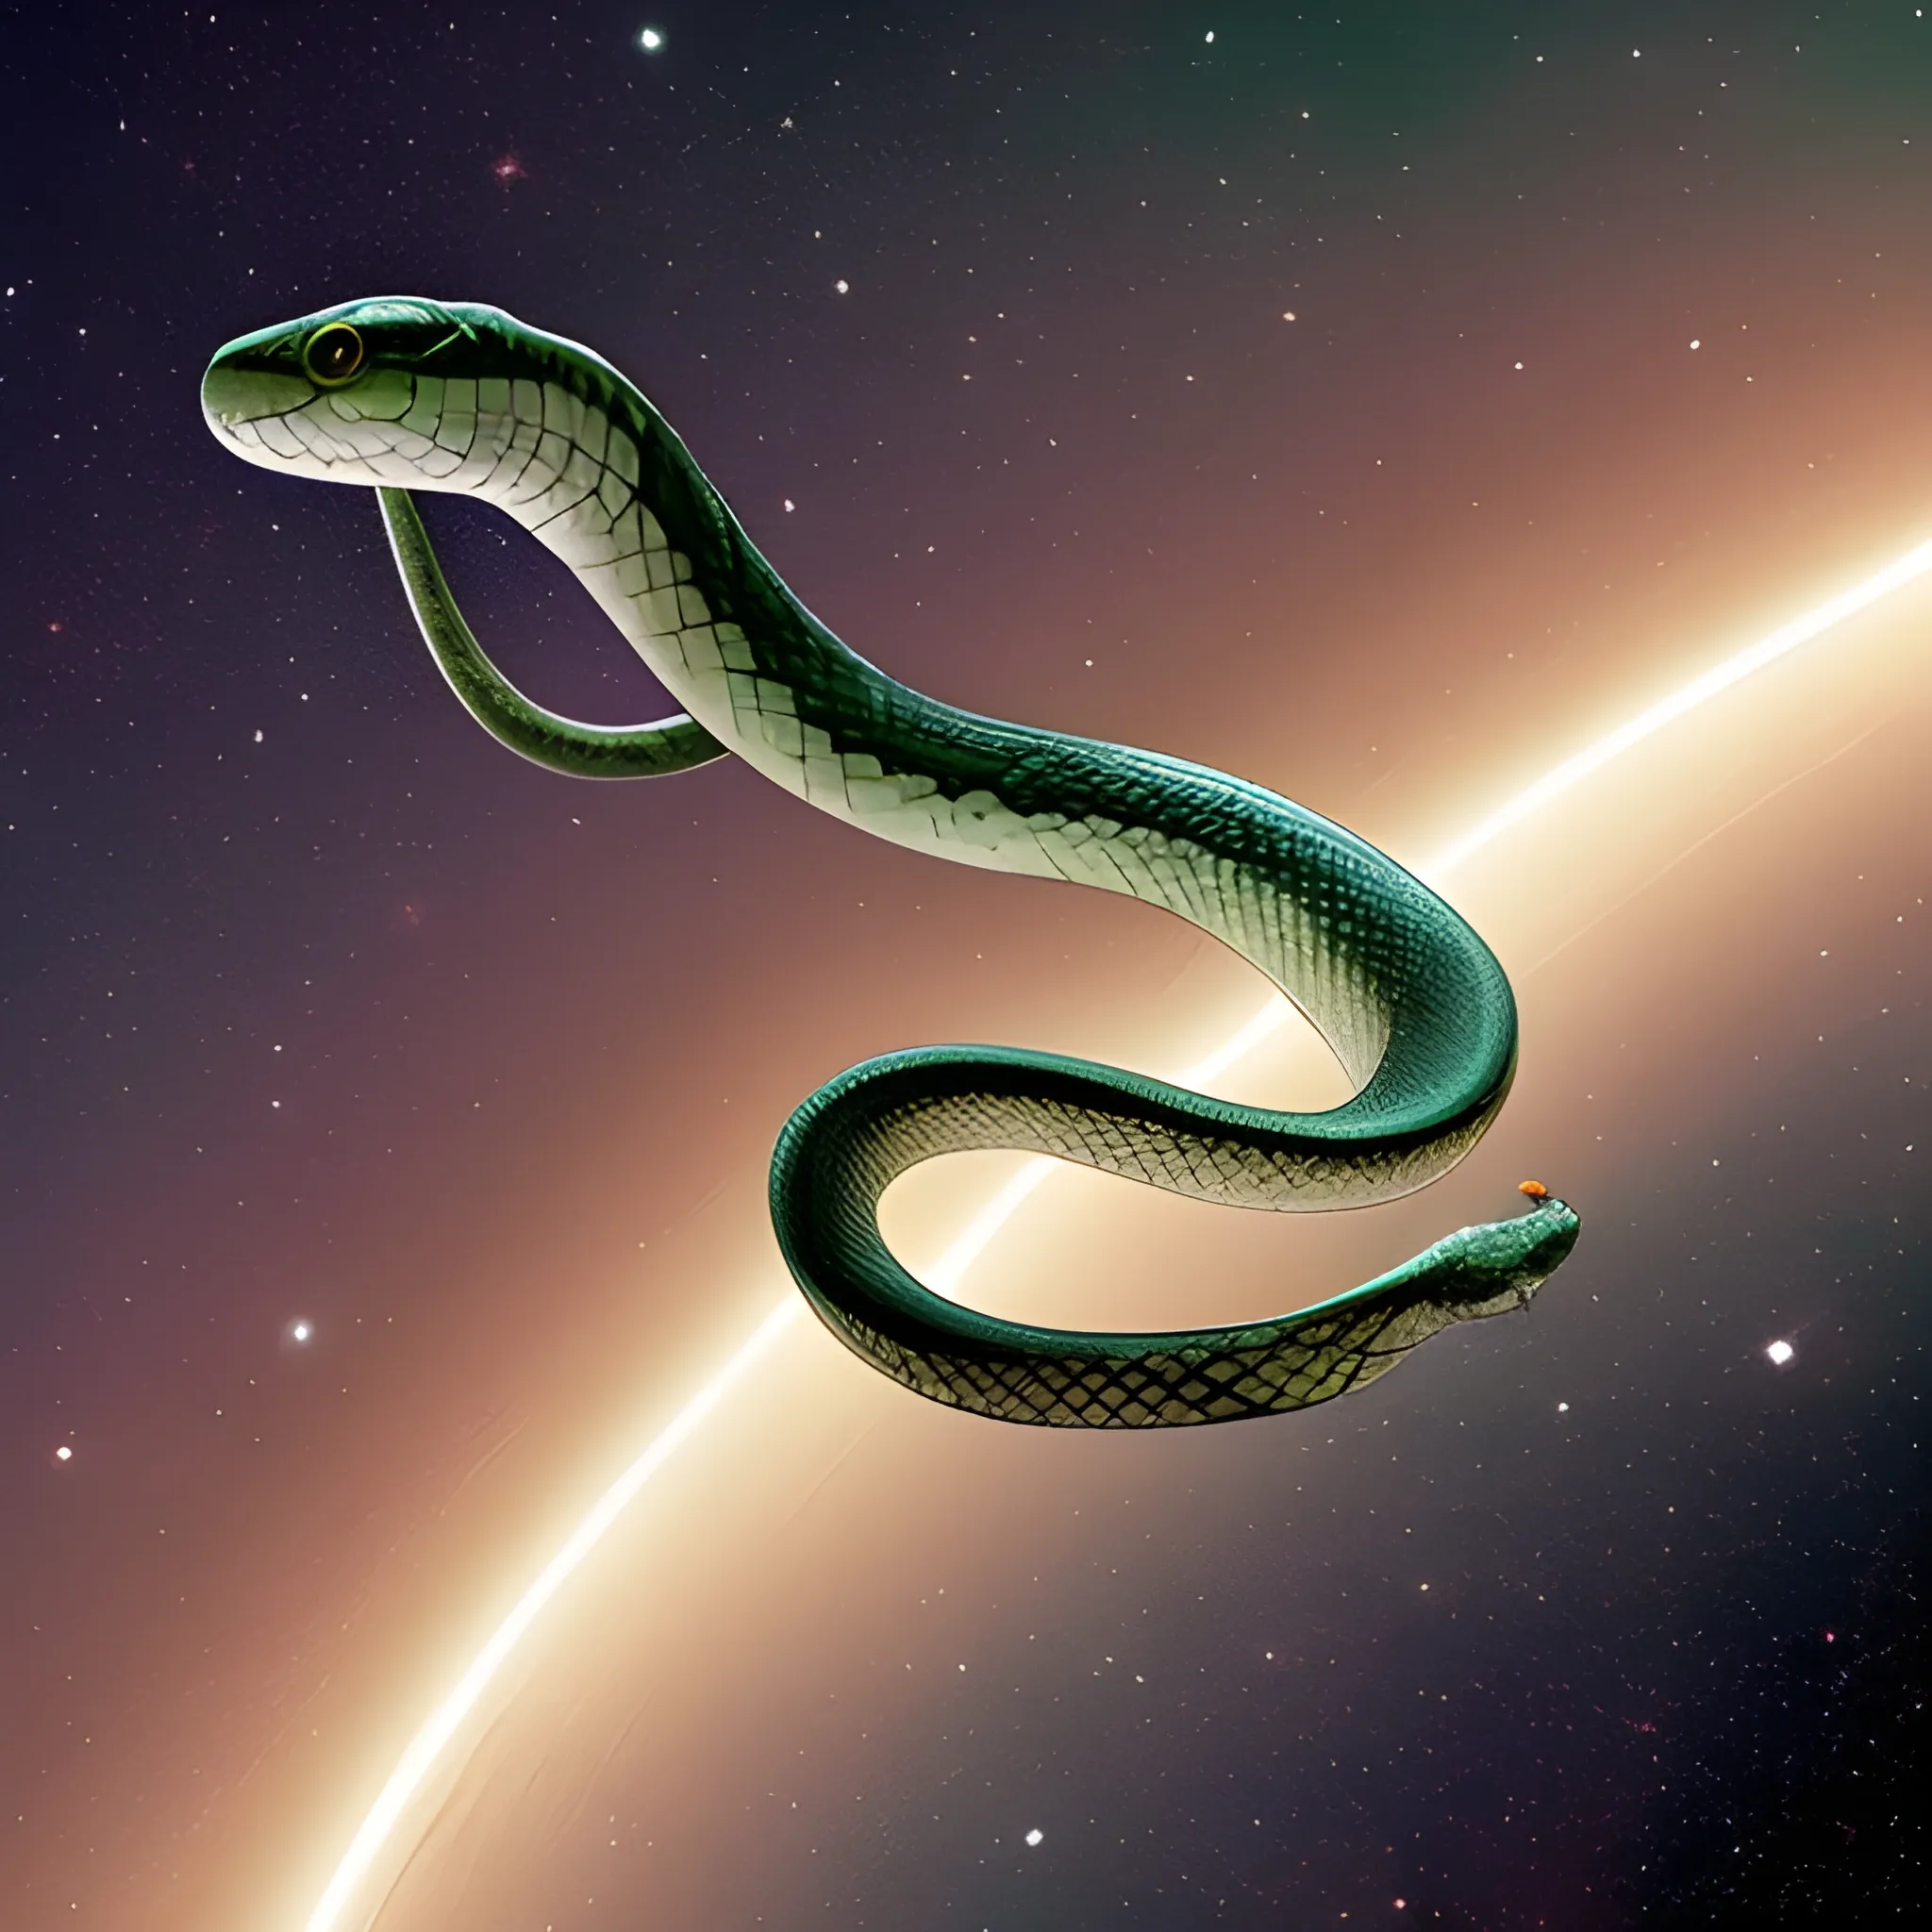 a snake flying through space